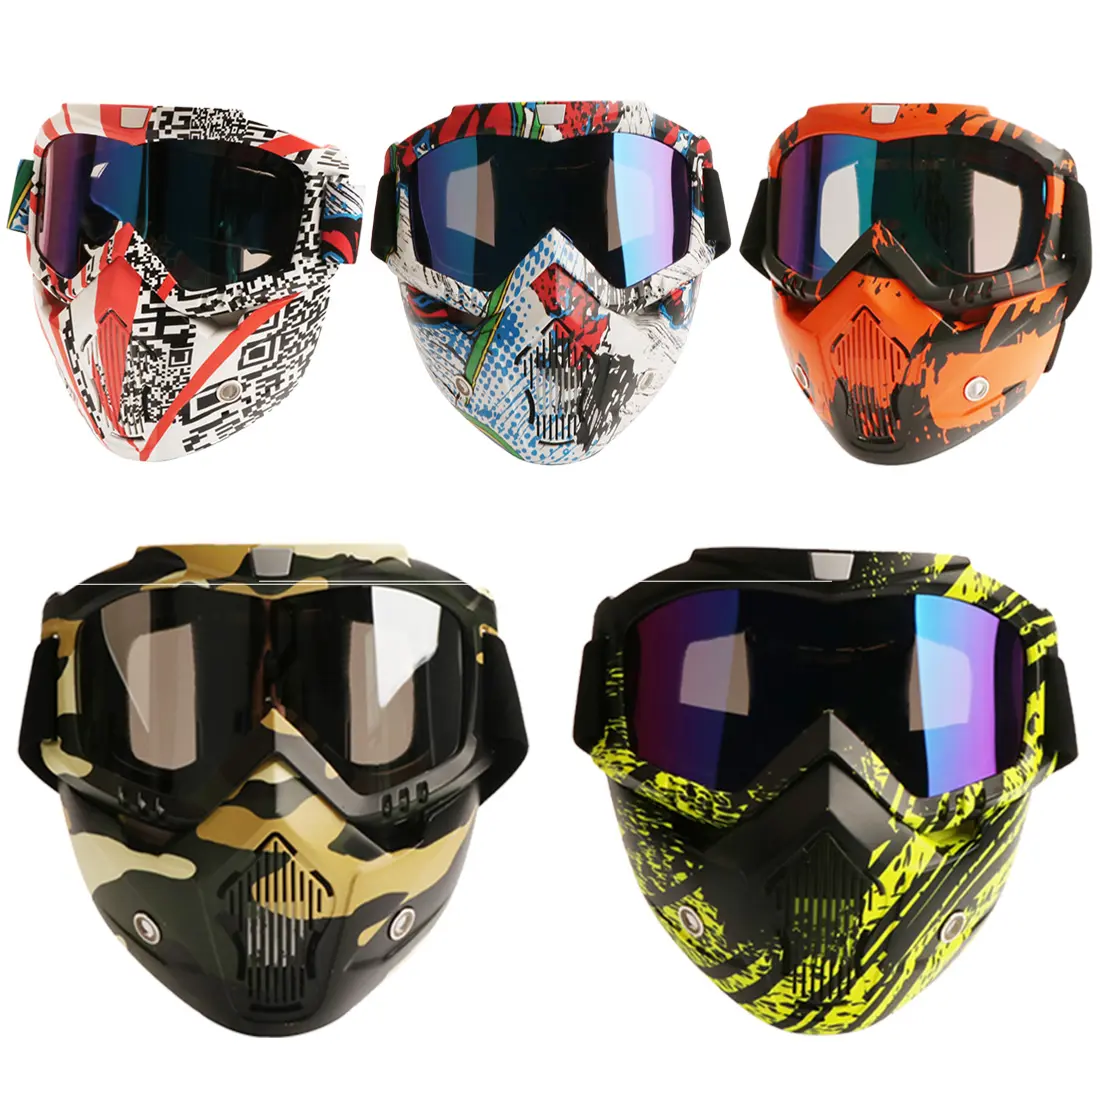 2021 hot adult outdoor motorcycle racing PC lens mask googles